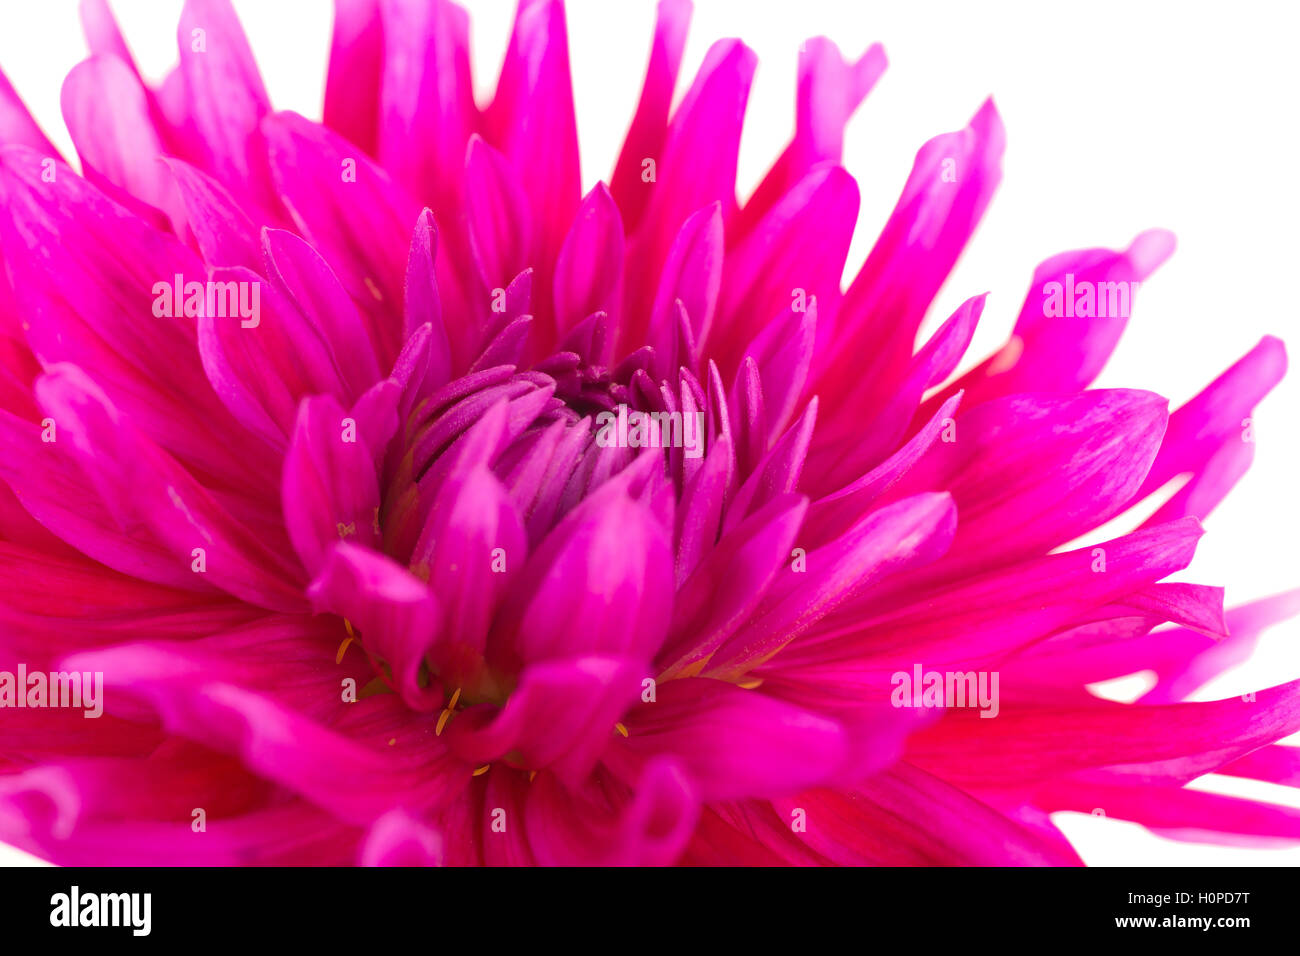 Cactus dahlia from the home garden on a white background. Stock Photo